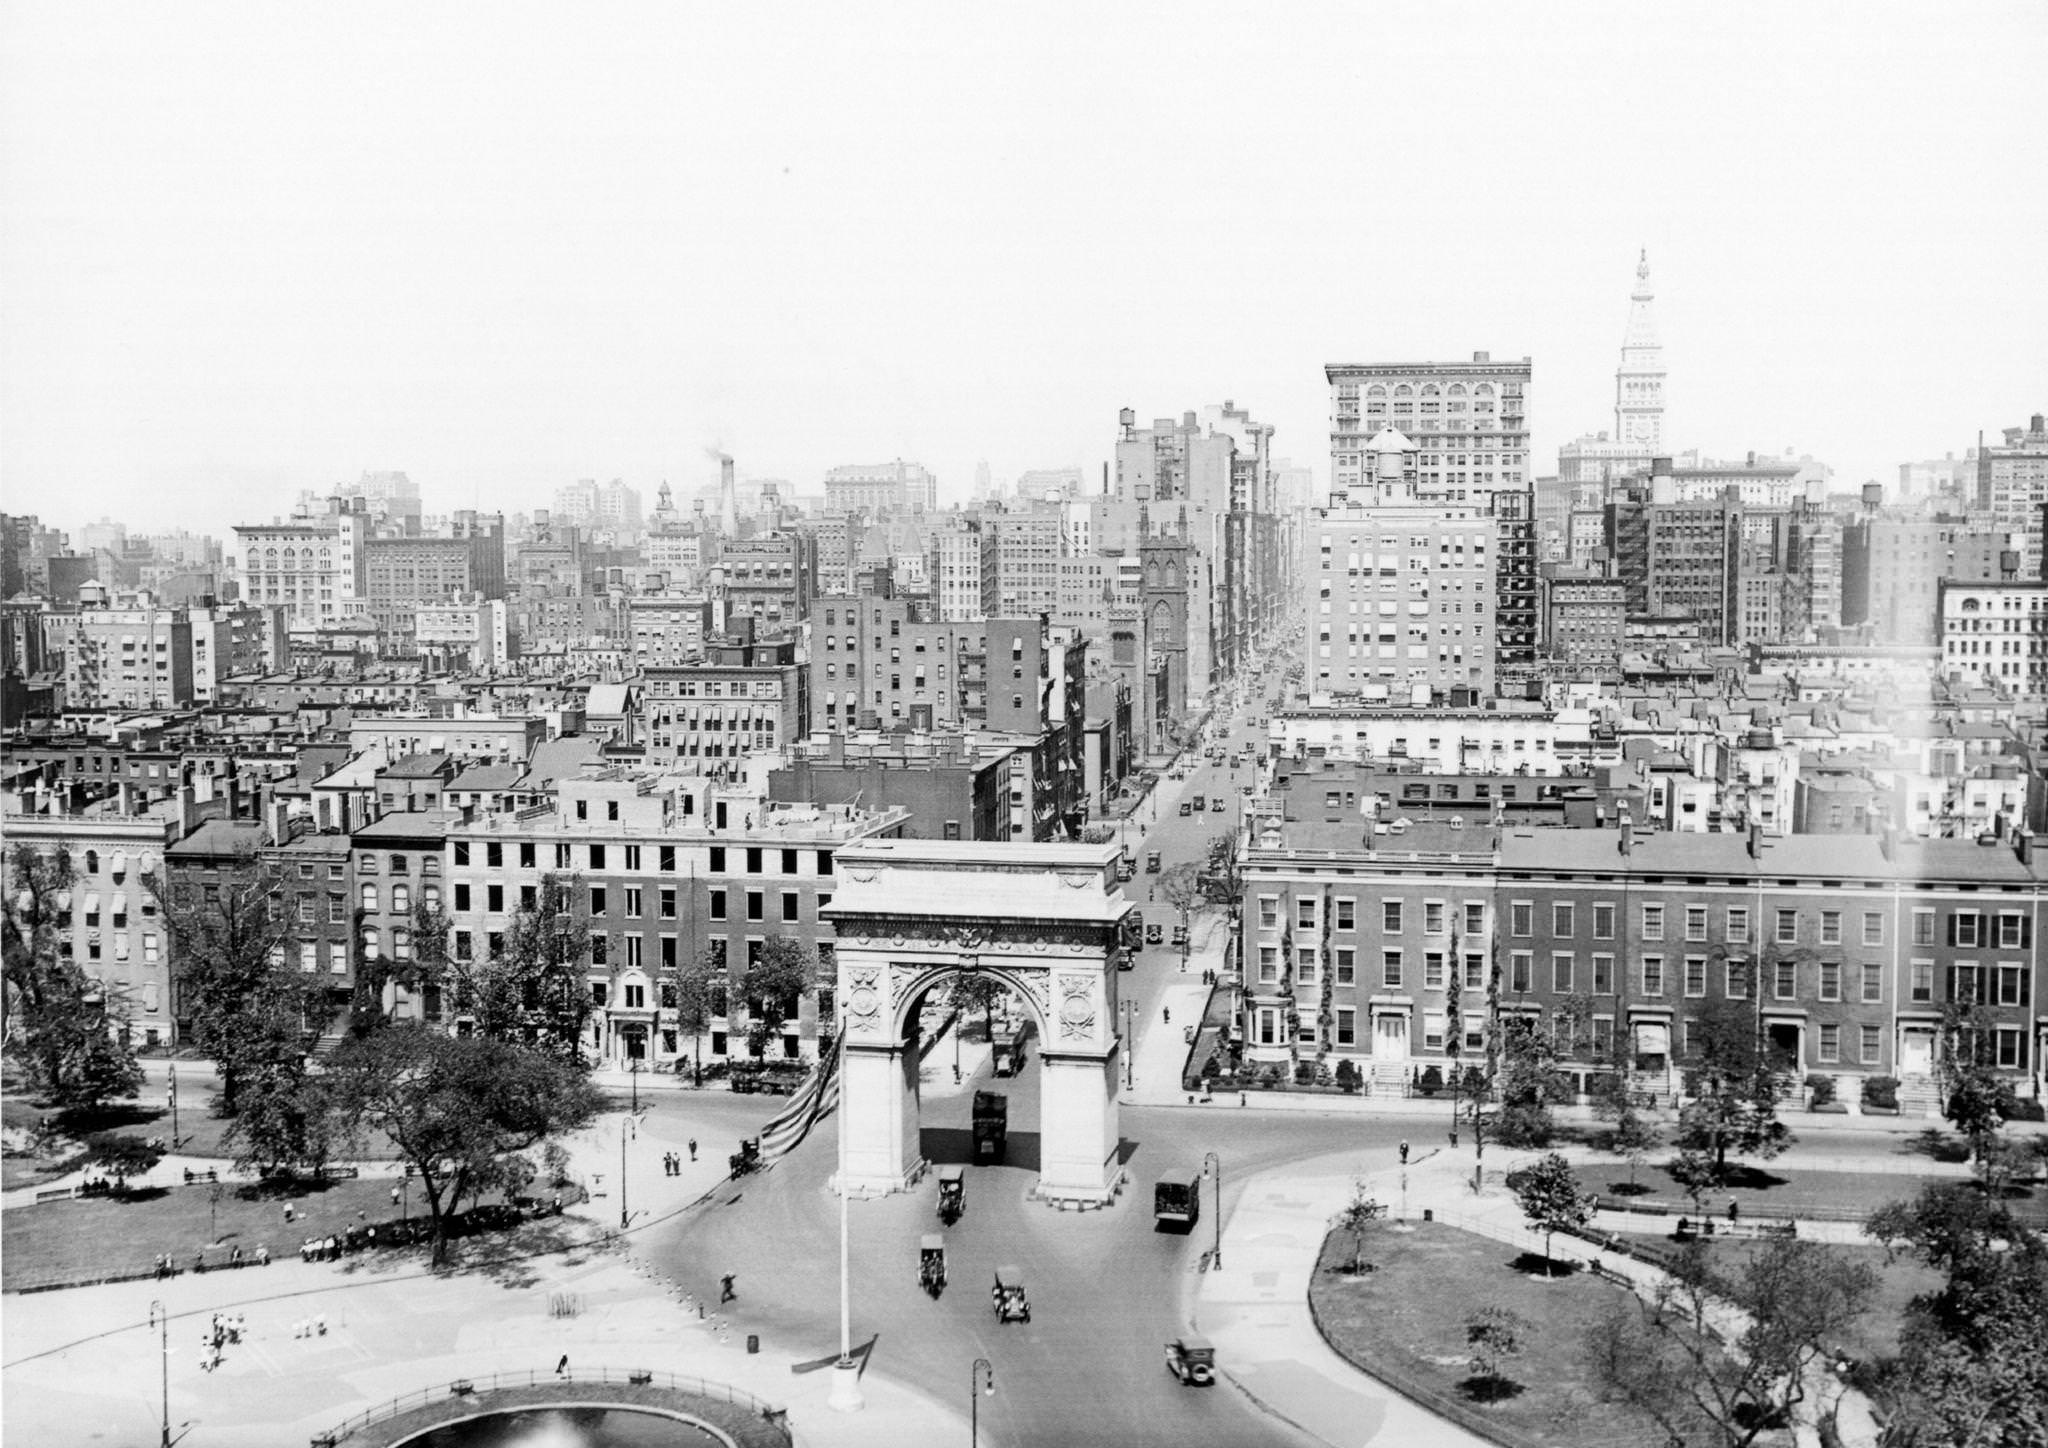 View, looking north, at Washington Square Park, with traffic visible as it enters through the arch off Fifth Avenue, 1920